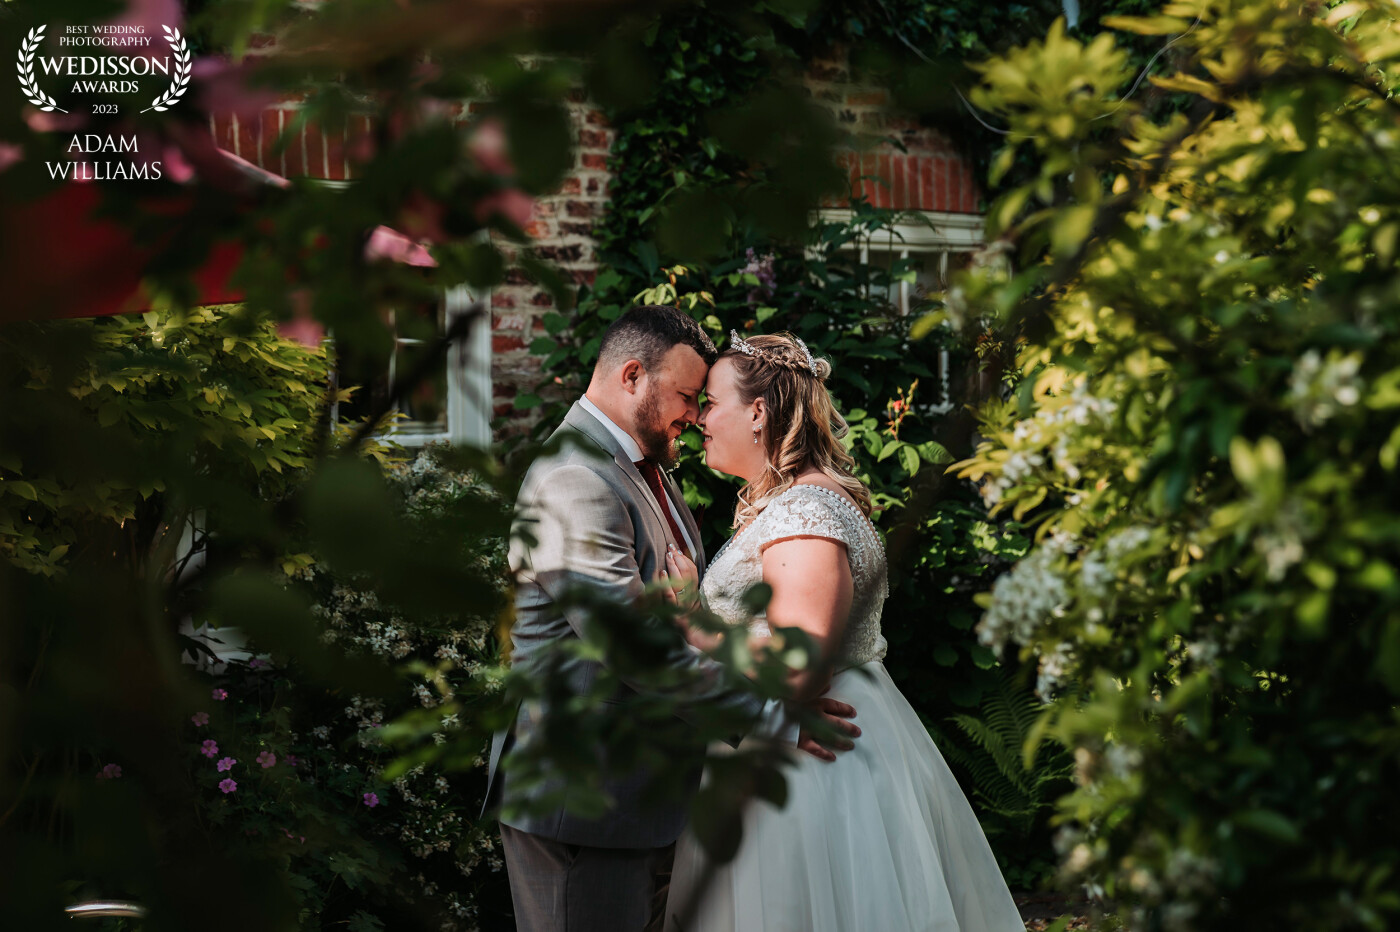 We had a fantastic time at Jade & Bens wedding, The flower gardens at The York Pavilion were beautiful and gave us lots of lovely frames to utilise for our images!